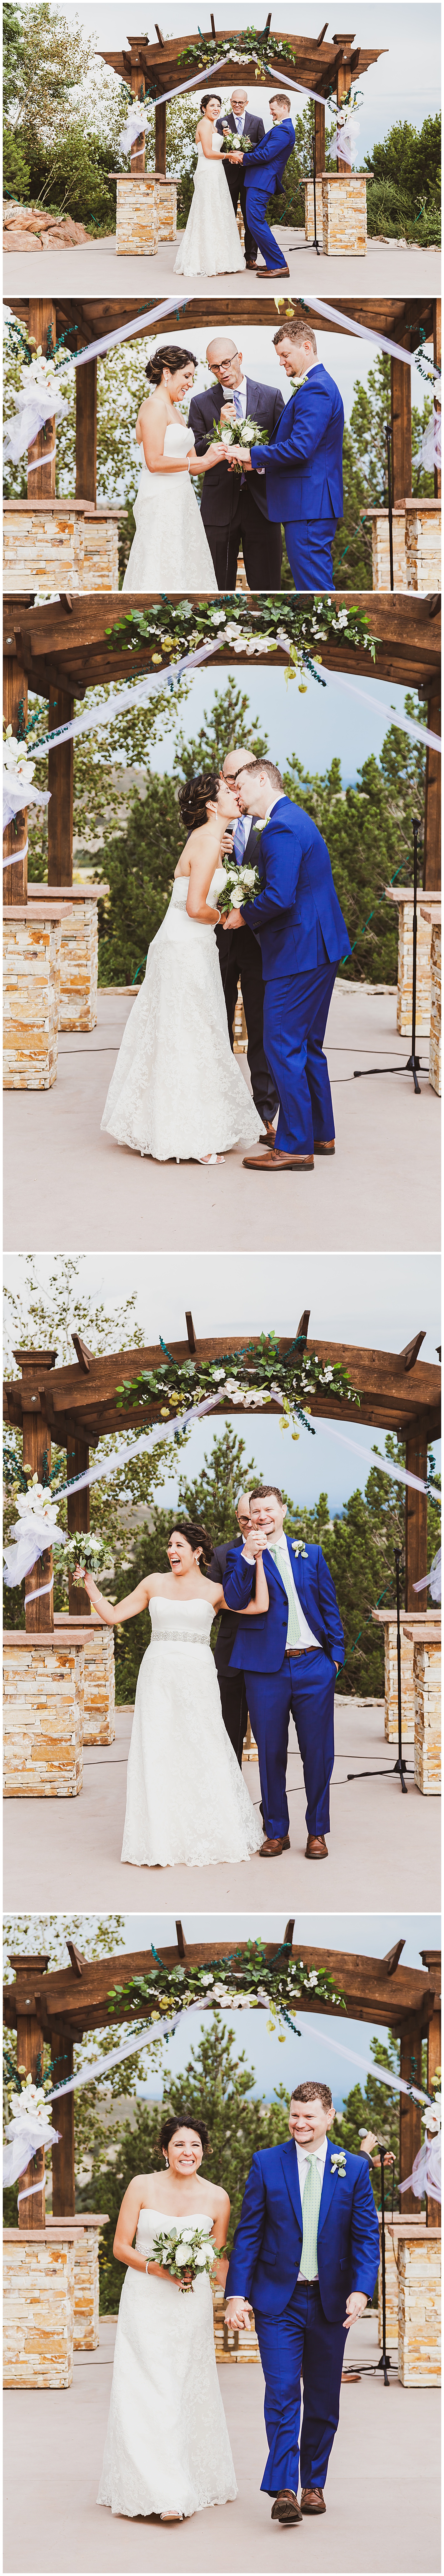 small wedding at willow ridge manor in morrison, co